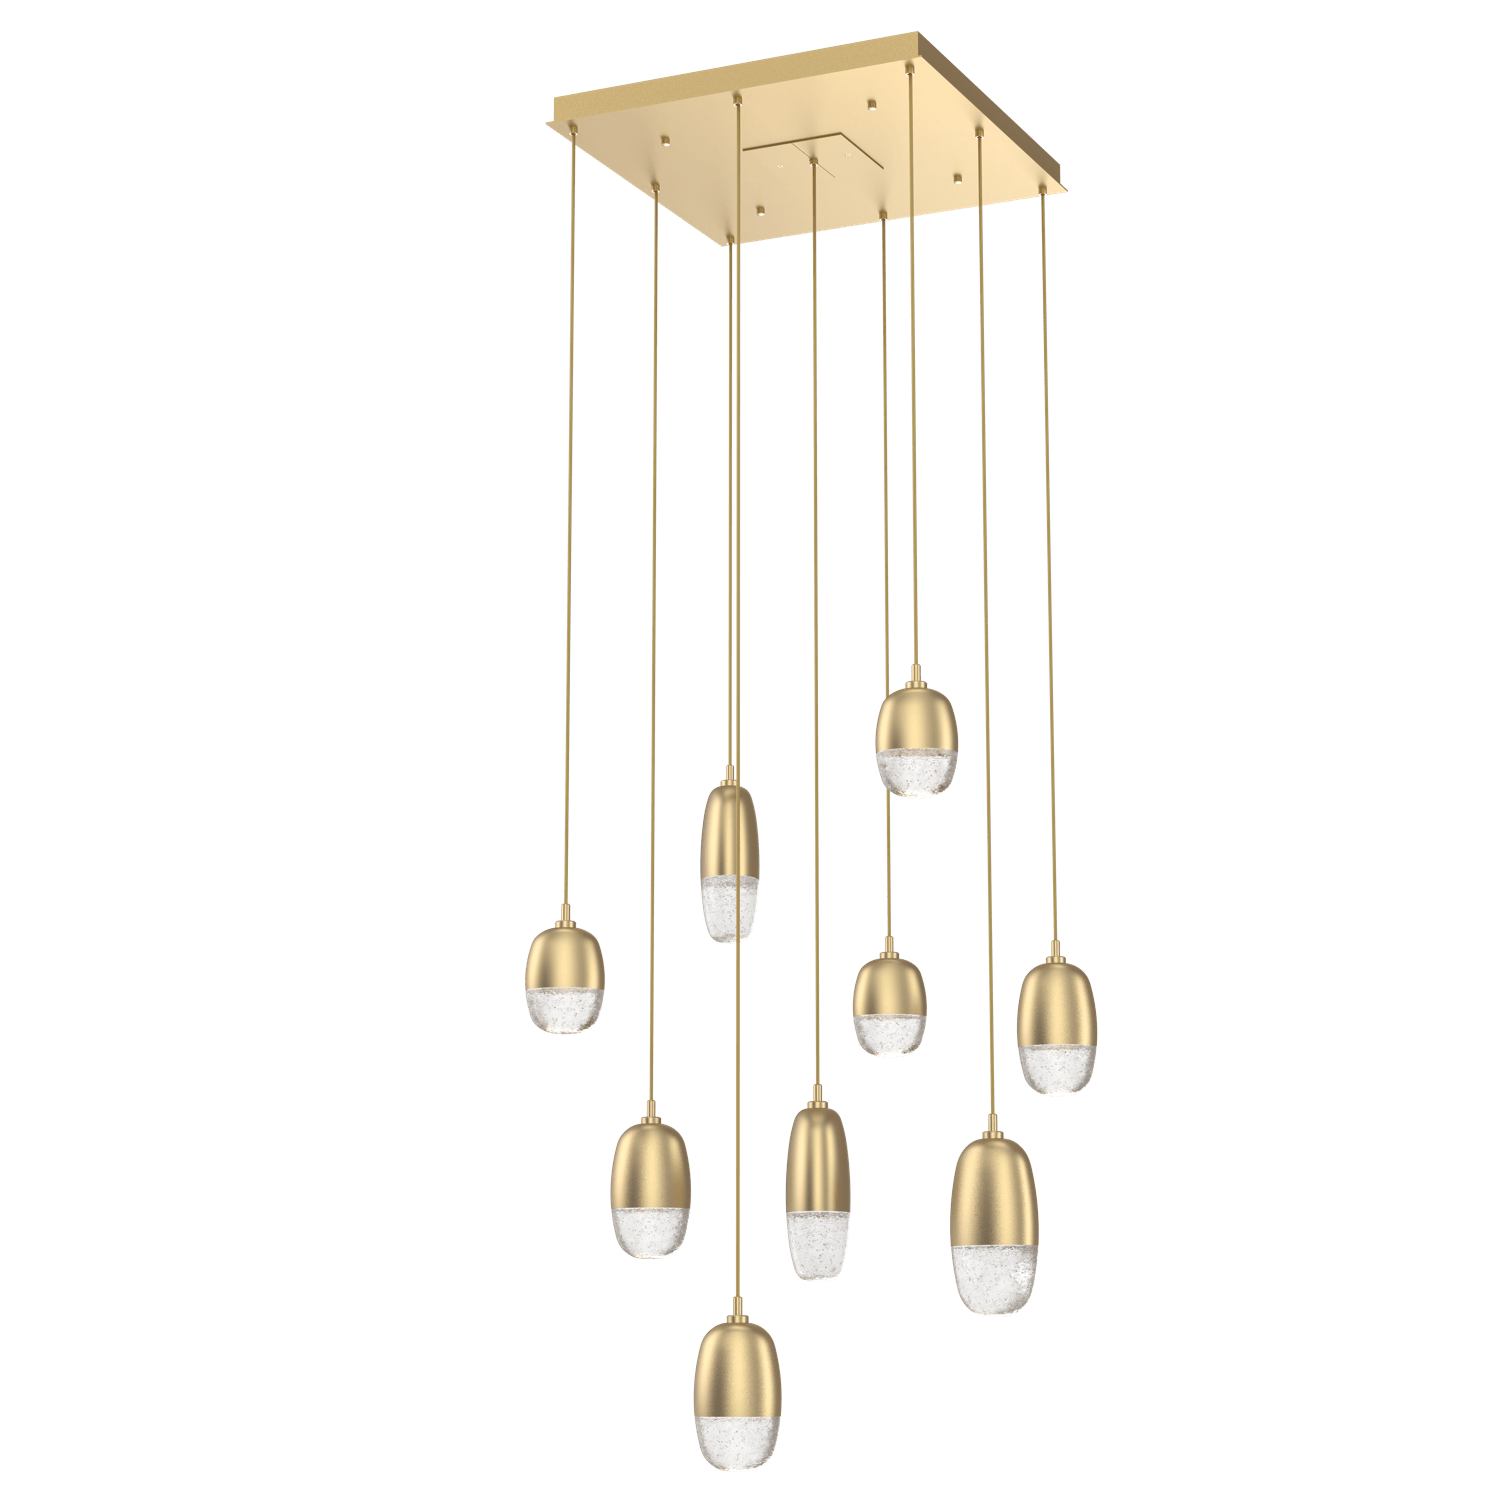 CHB0079-09-GB-Hammerton-Studio-Pebble-9-light-square-pendant-chandelier-with-gilded-brass-finish-and-clear-cast-glass-shades-and-LED-lamping